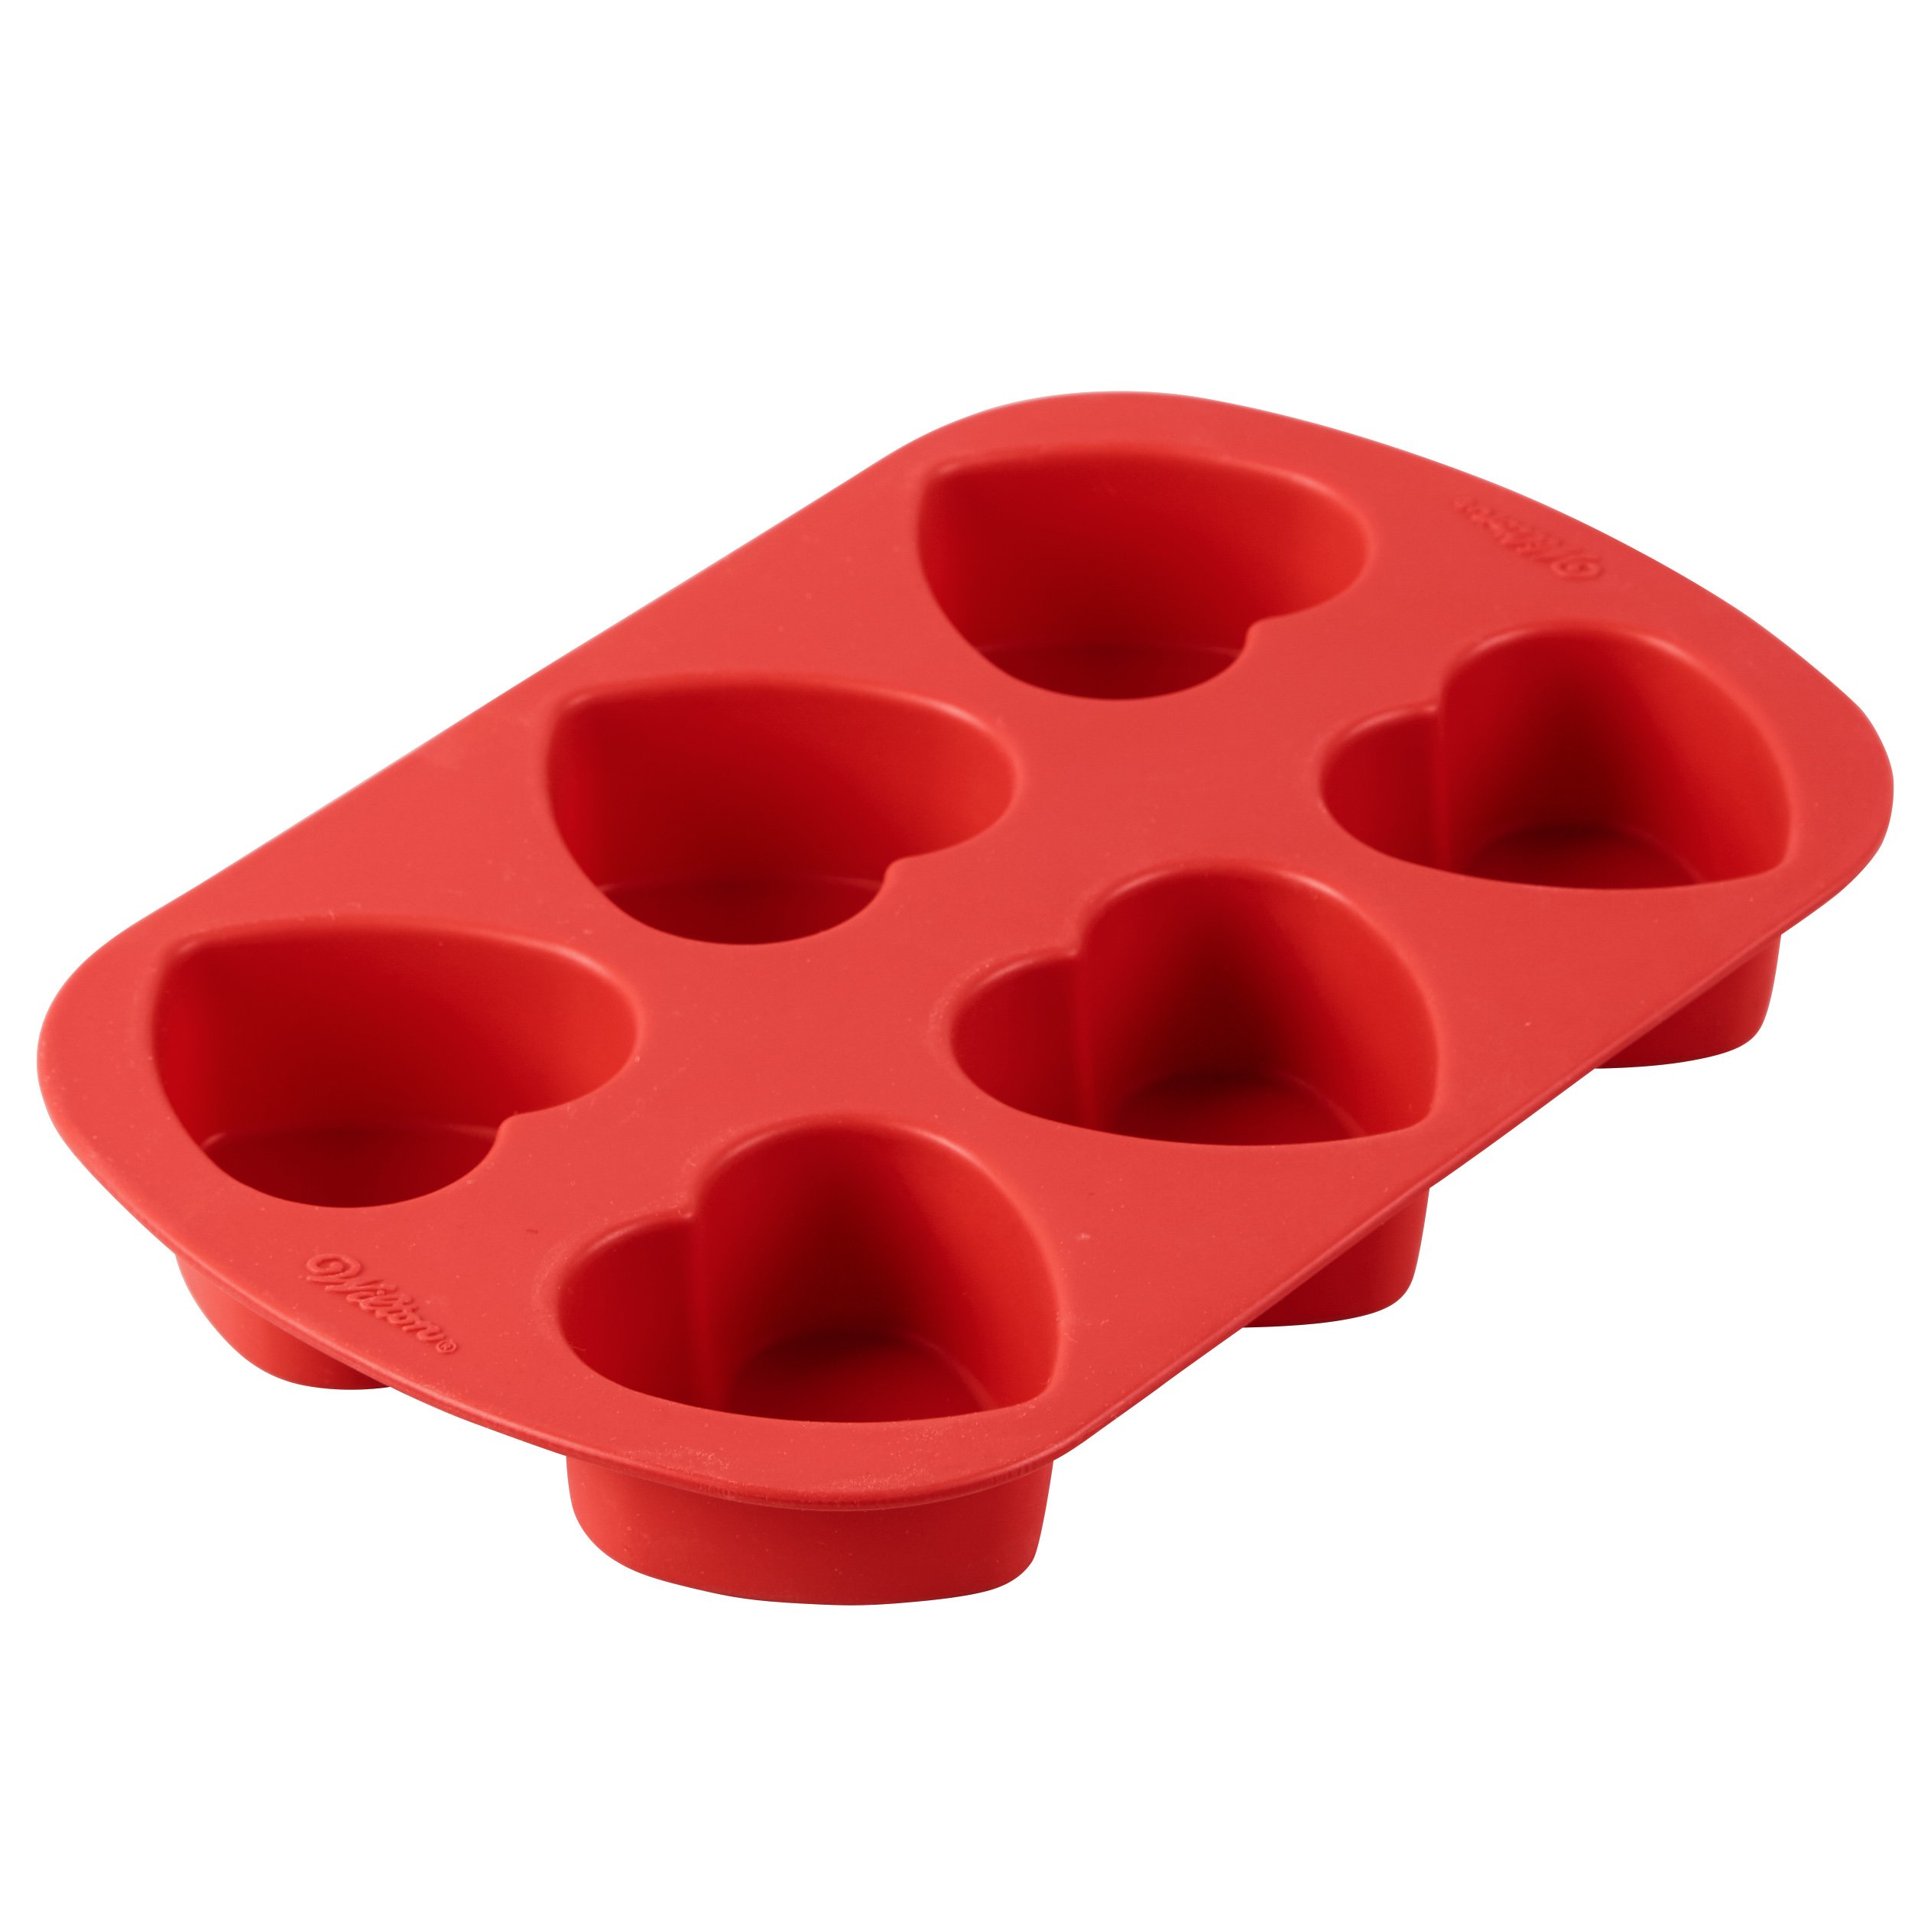 Wilton Mini Silicone Heart Mold, 6-Cavity Silicone Mold for Heart Shaped Cookies and Candy, Red